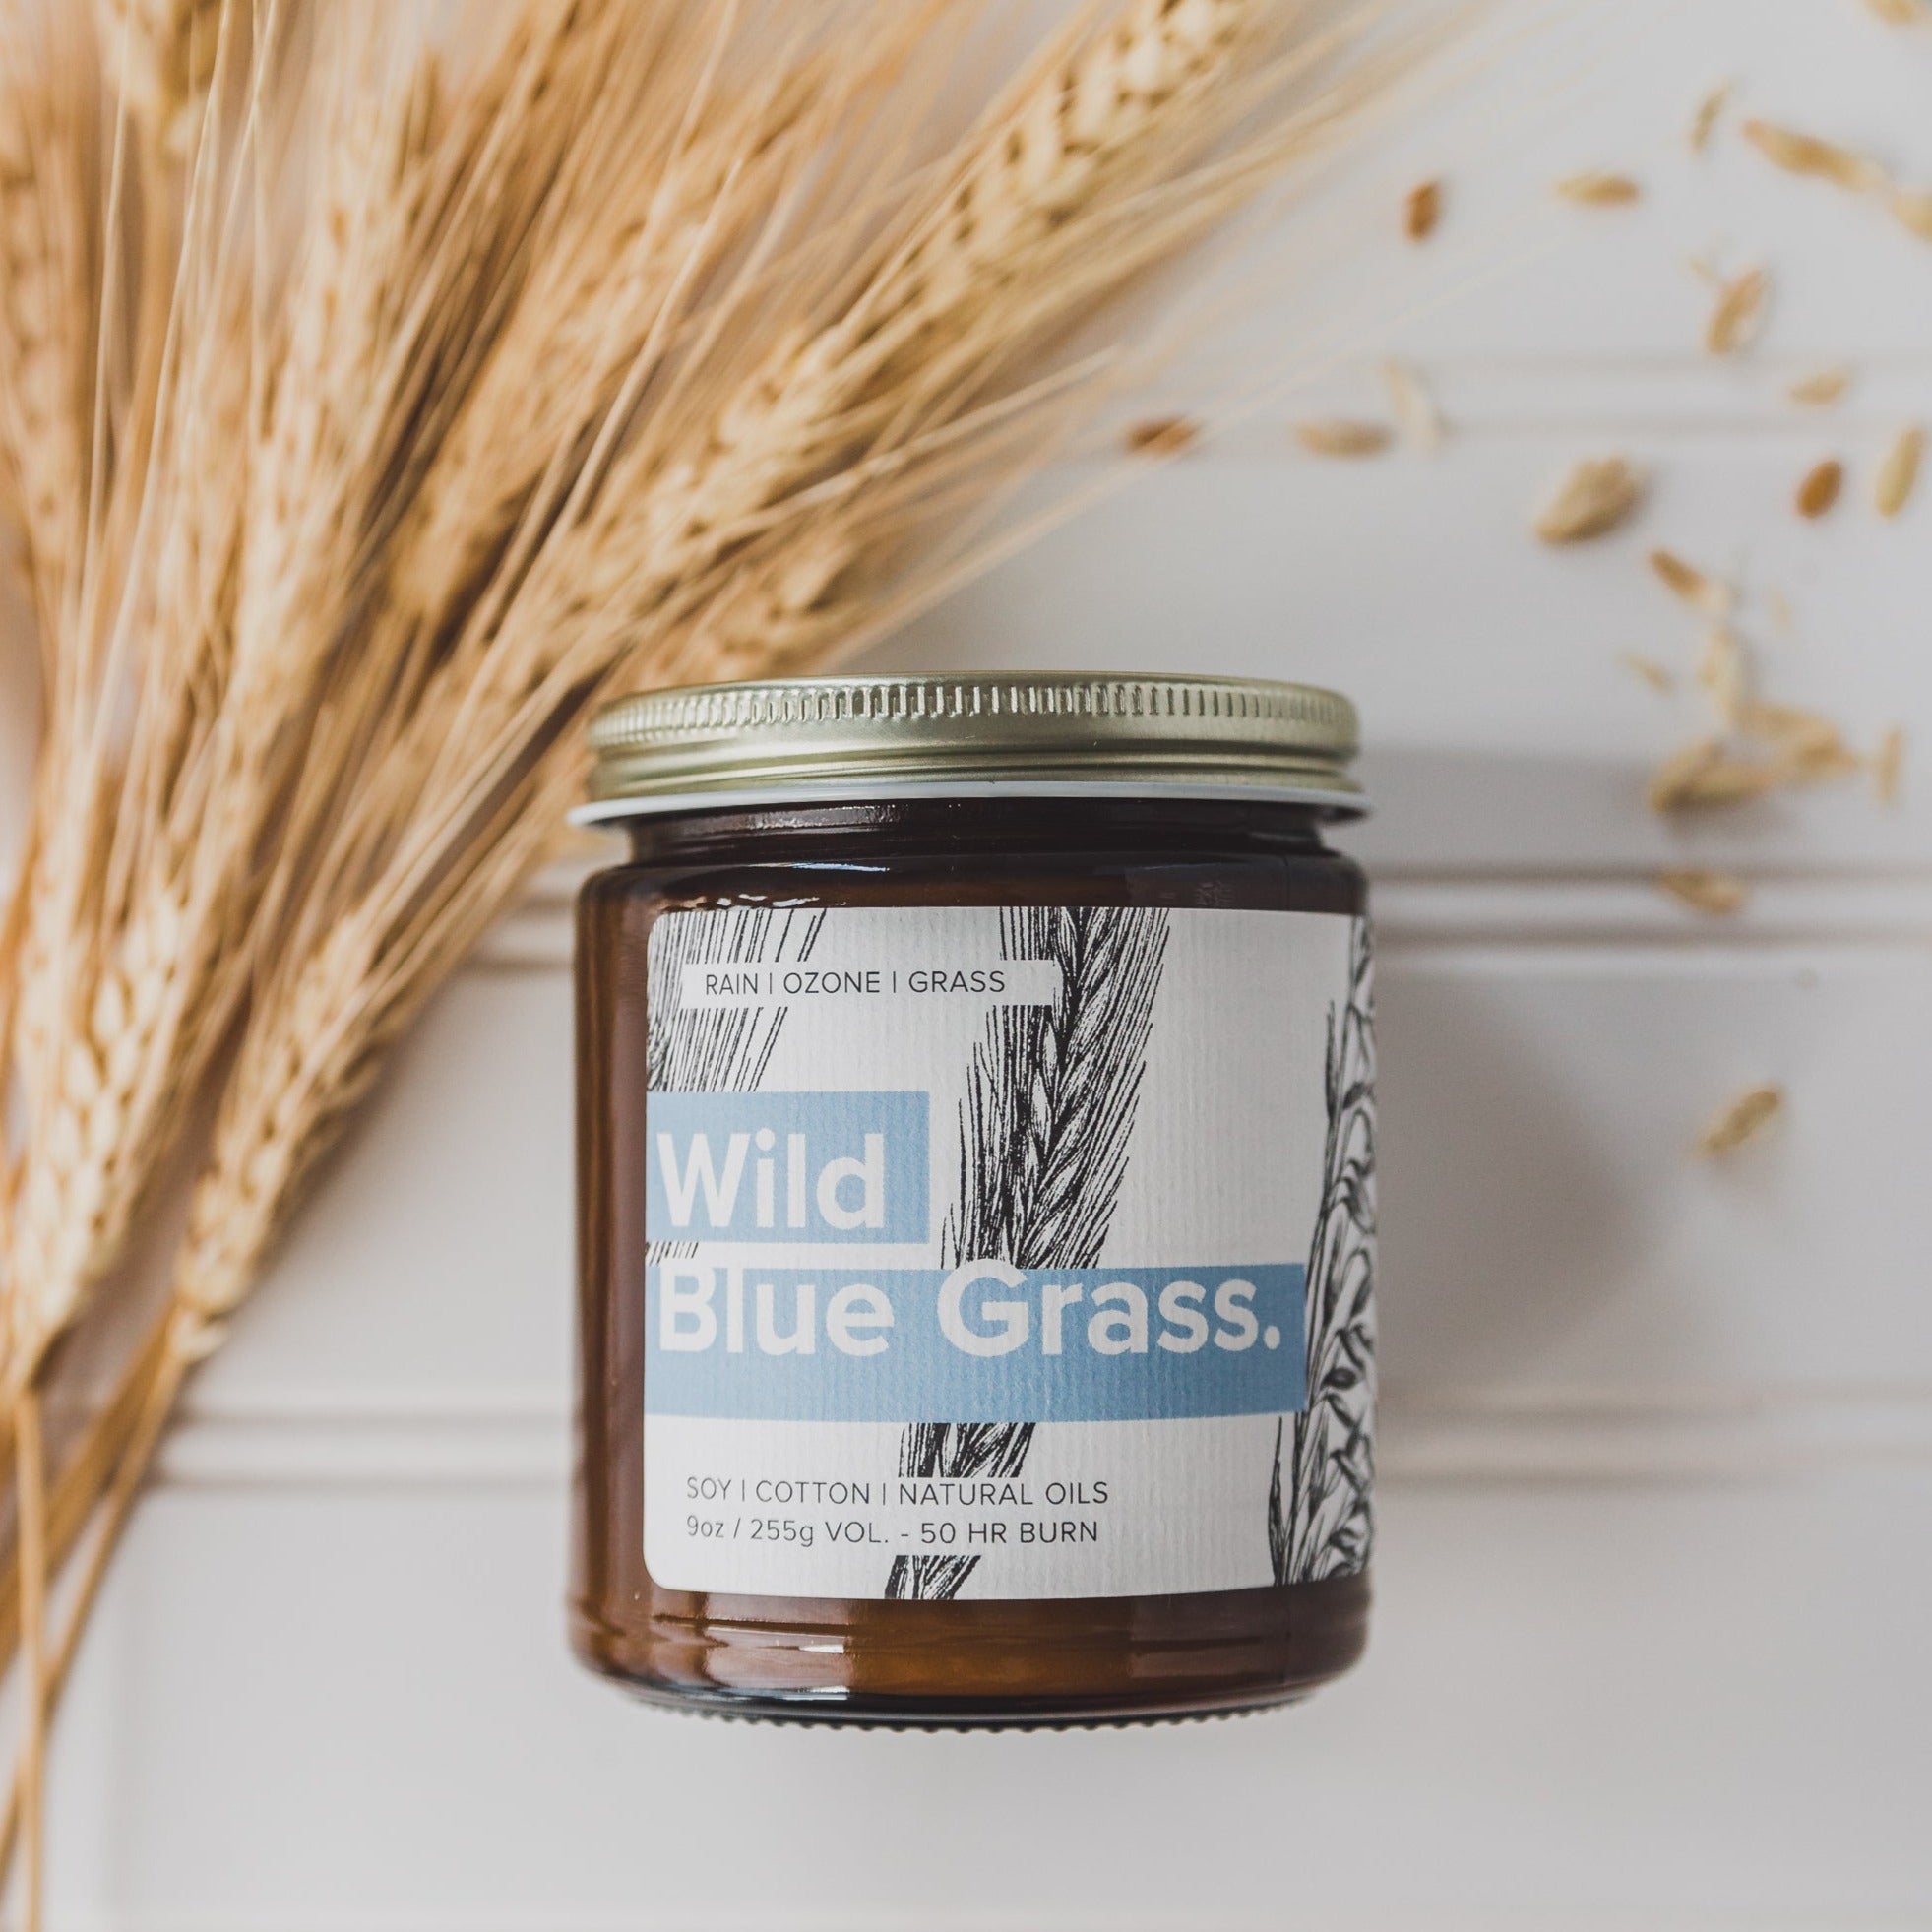 9oz Wild Blue Grass Soy Candles